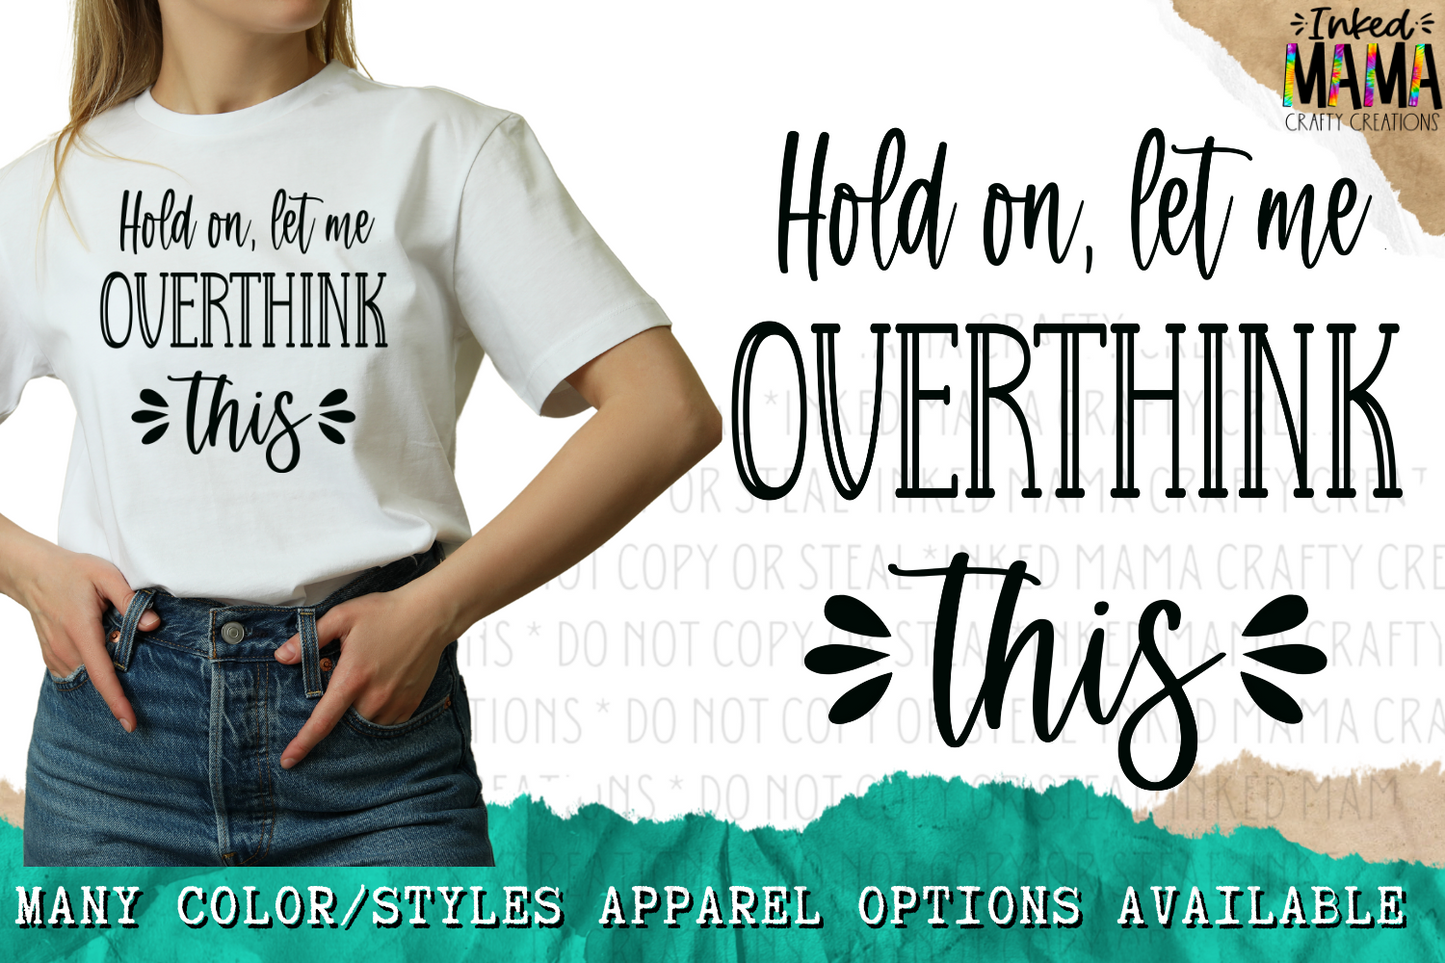 Hold on, let me overthink this - Apparel